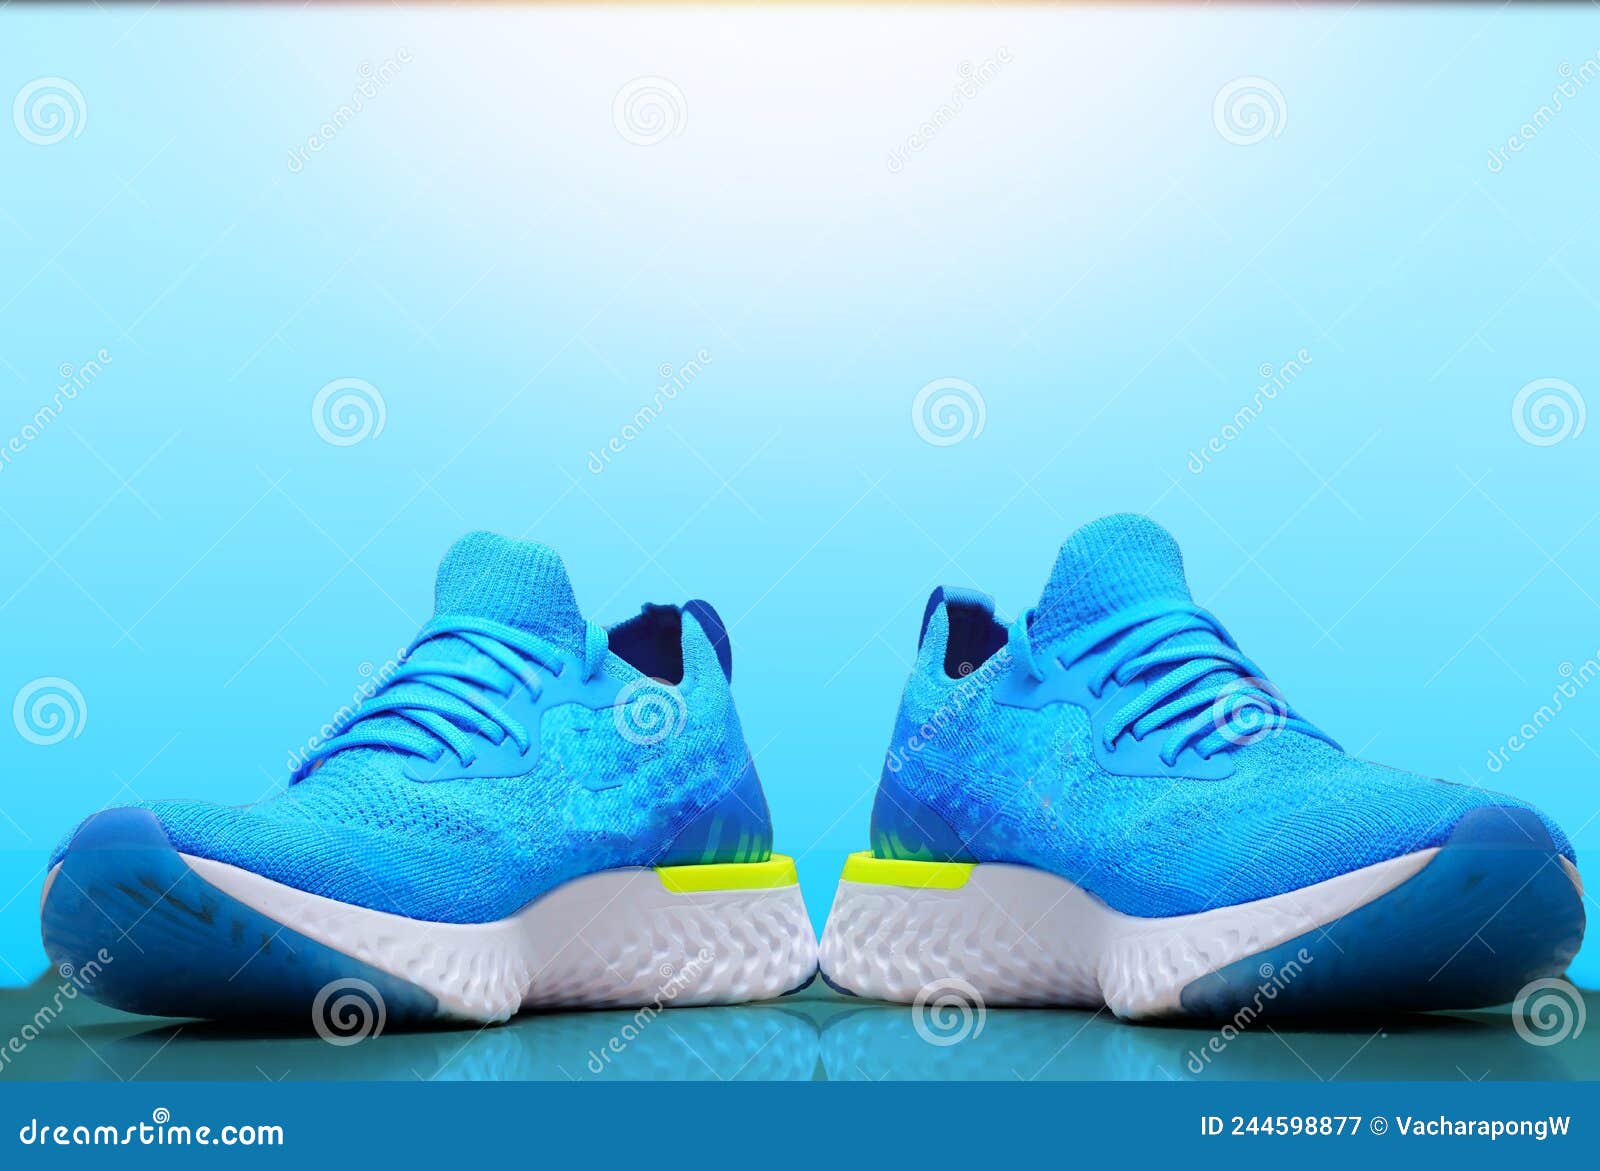 Blue Sport or Running Shoes for Runner with Reflection on Isolated Blur ...